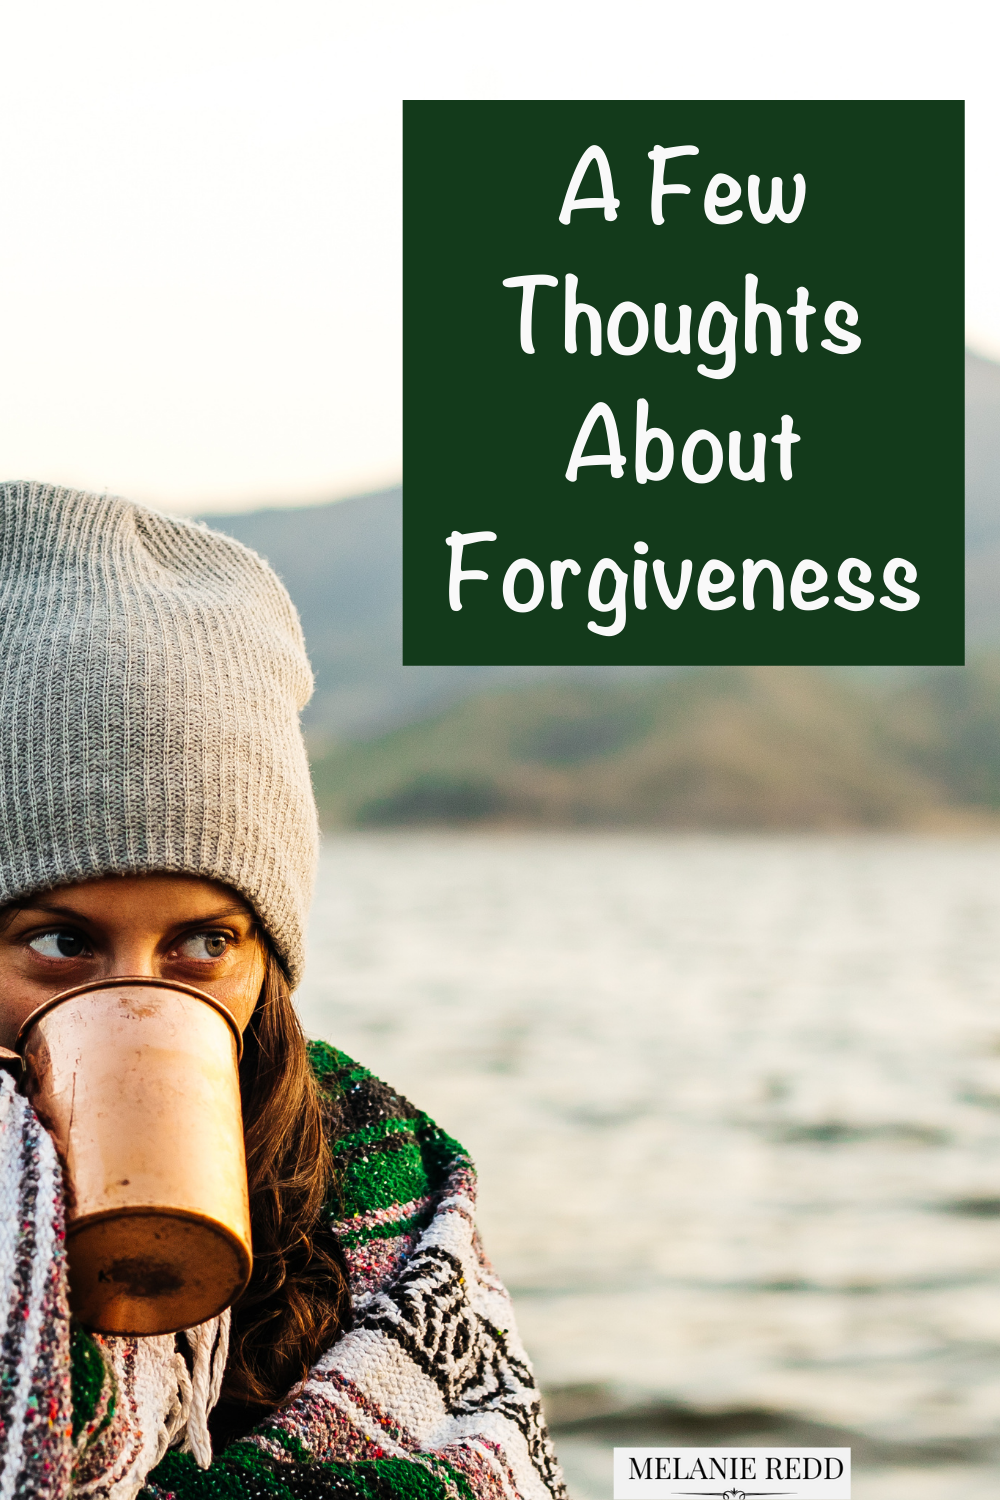 Without God’s forgiveness, Heaven would remain out of reach to all of us. Let's consider together a few thoughts about forgiveness.